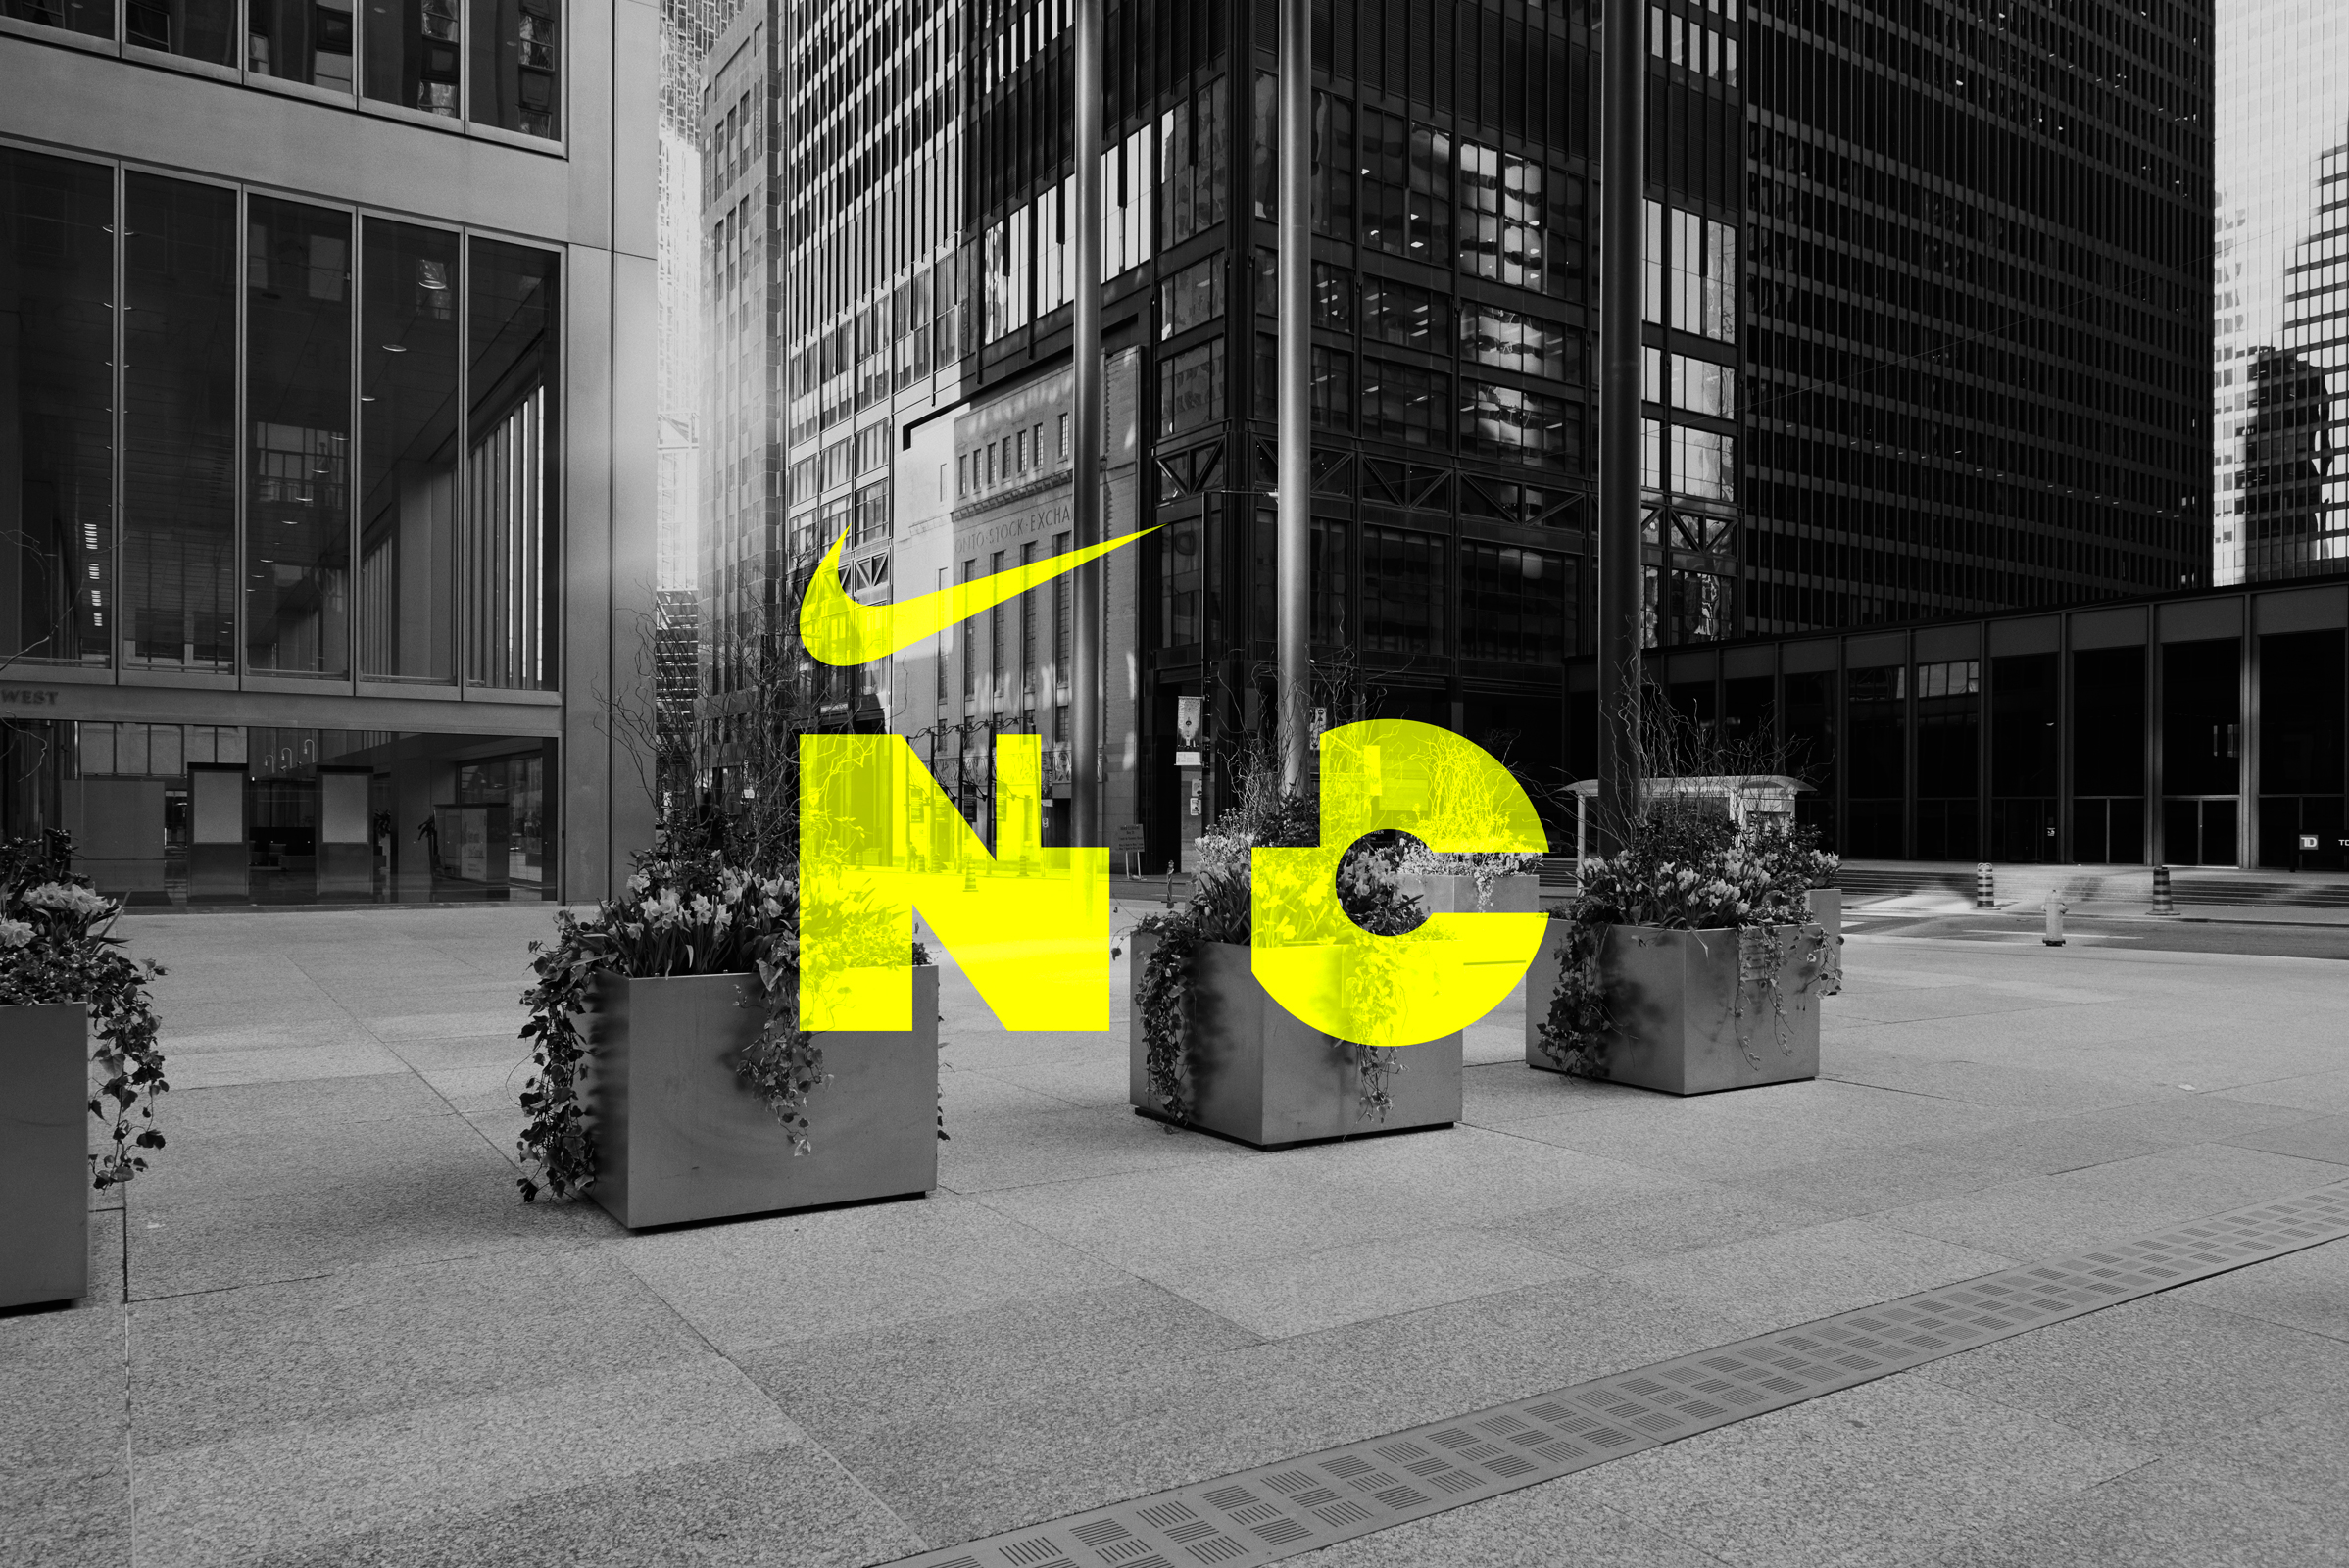  “NTC” Advertising Campaign    Agency: LG2    Client: Nike 